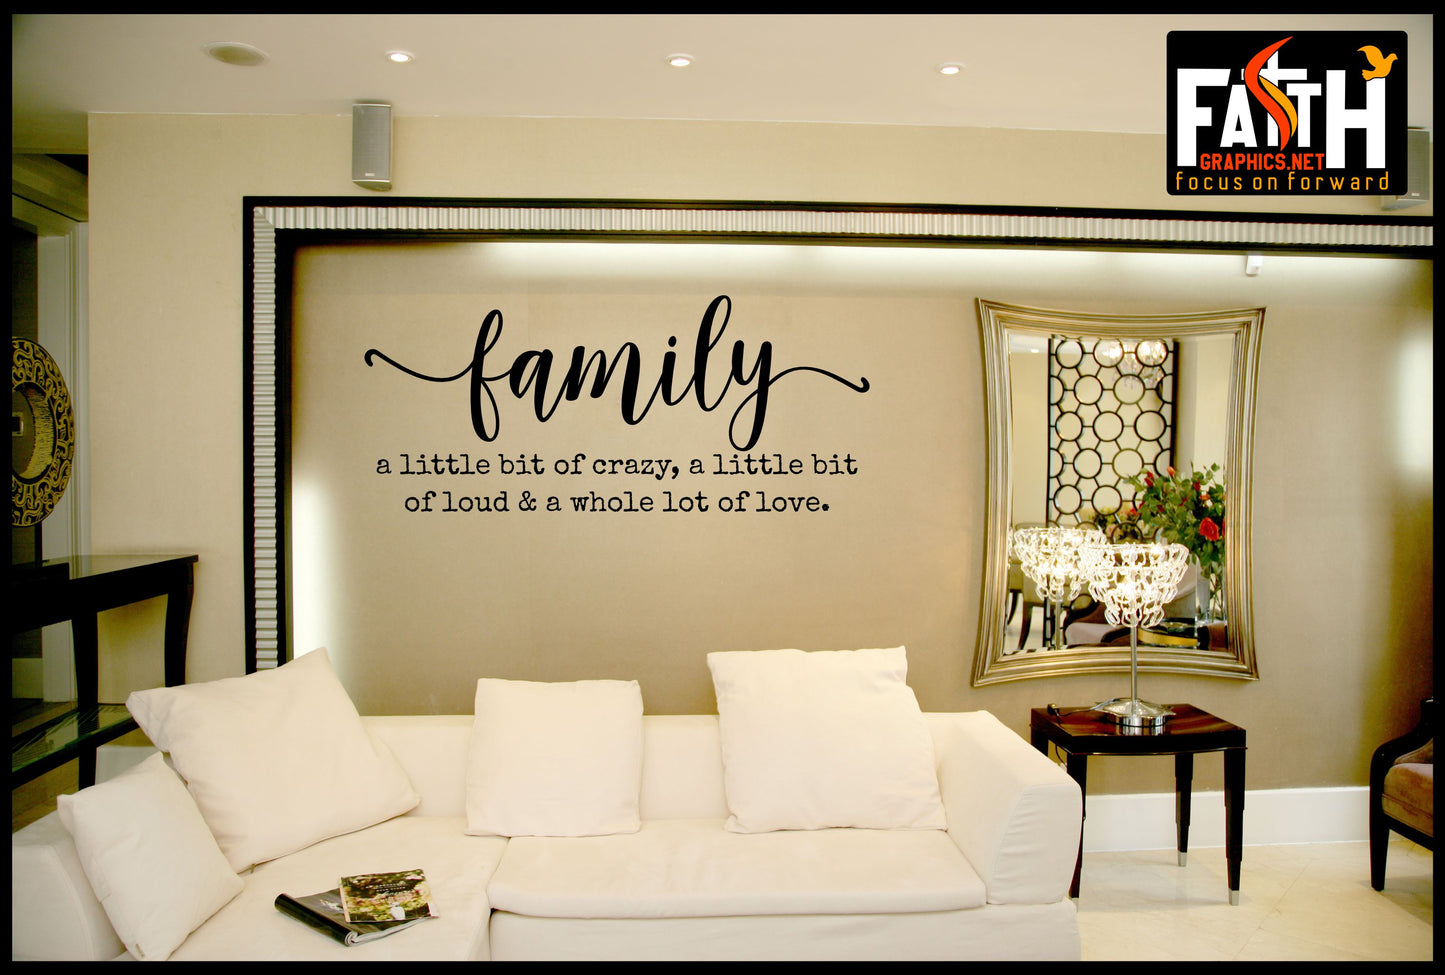 Family a little bit of crazy wall decal